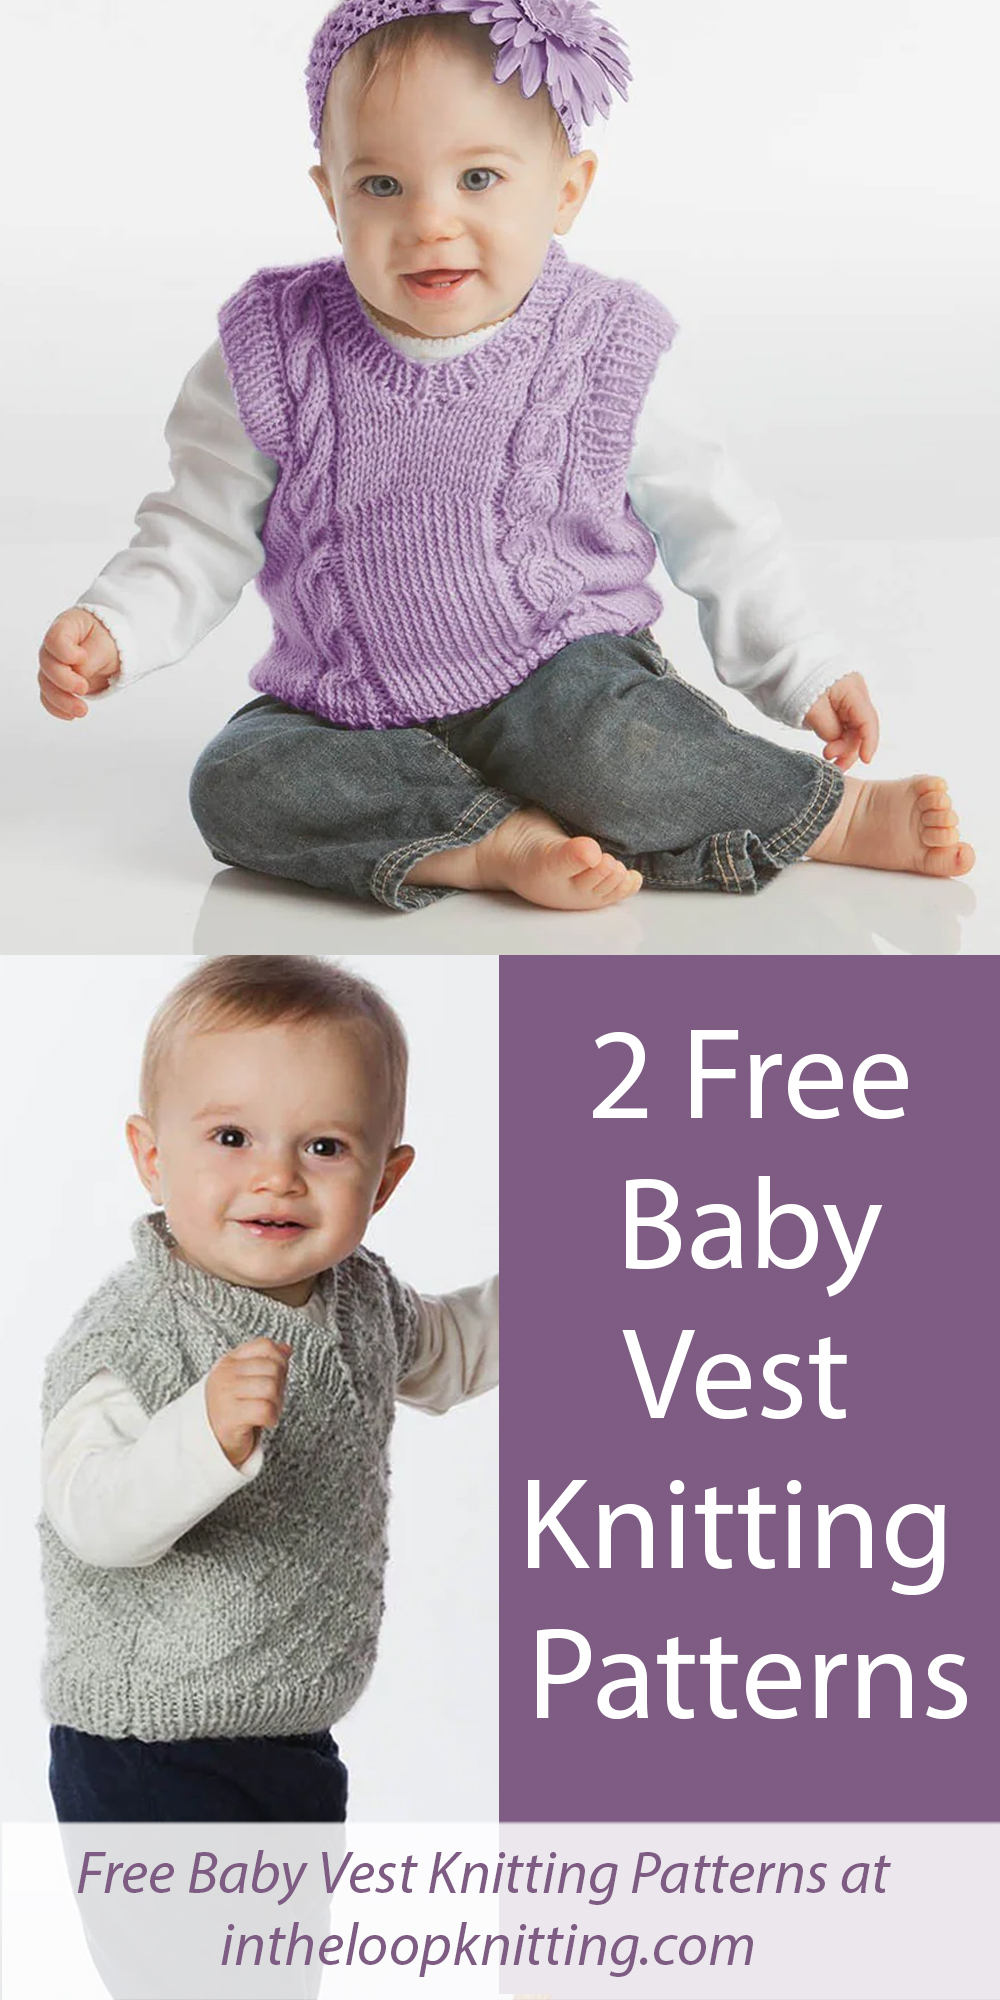 Free Baby Vest Knitting Patterns Twists Cabled Vest and Little Prince Vest